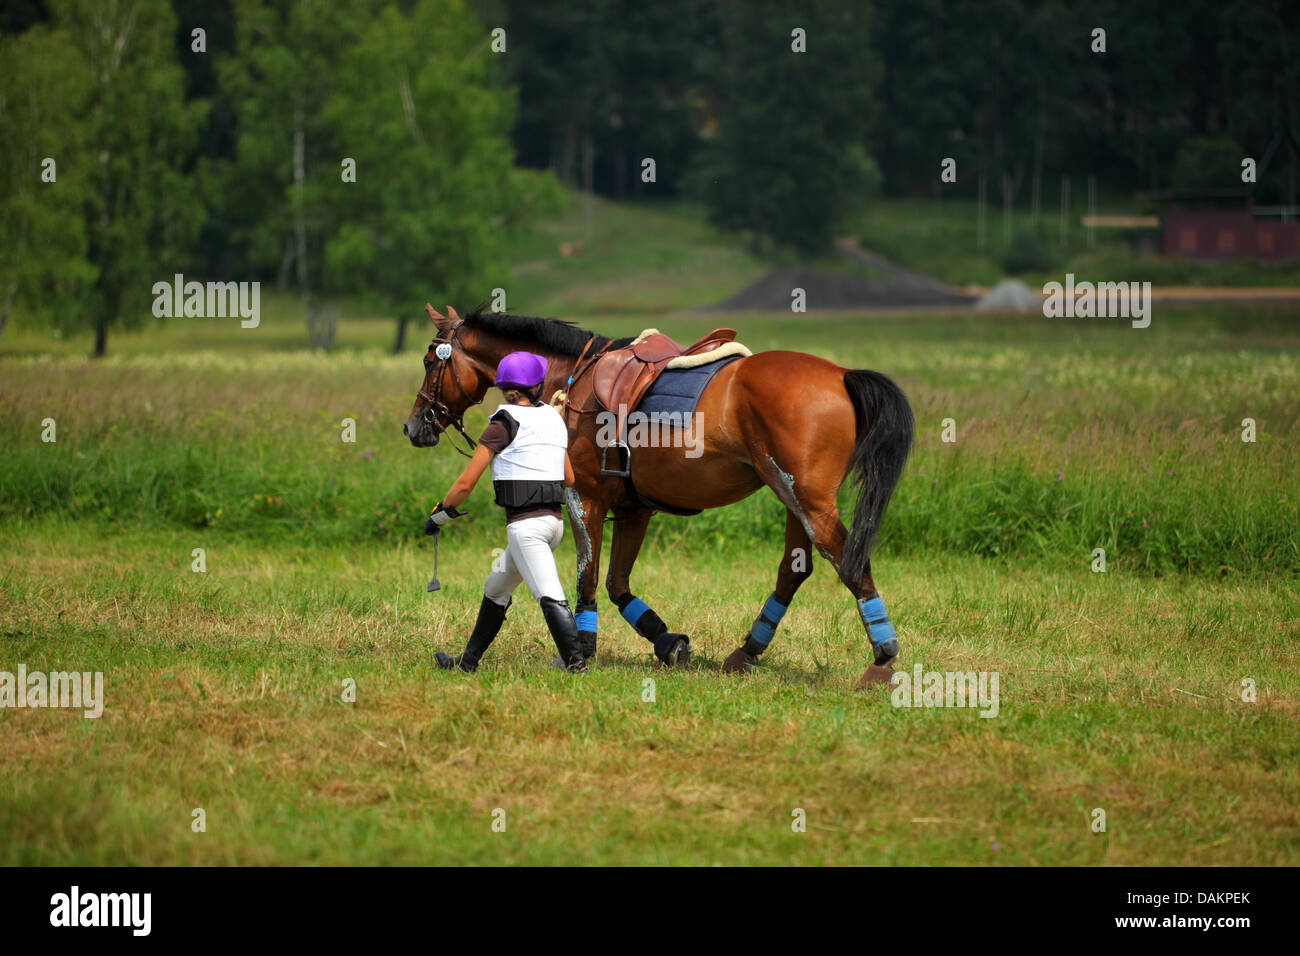 Young woman leading horse through grassy field Stock Photo